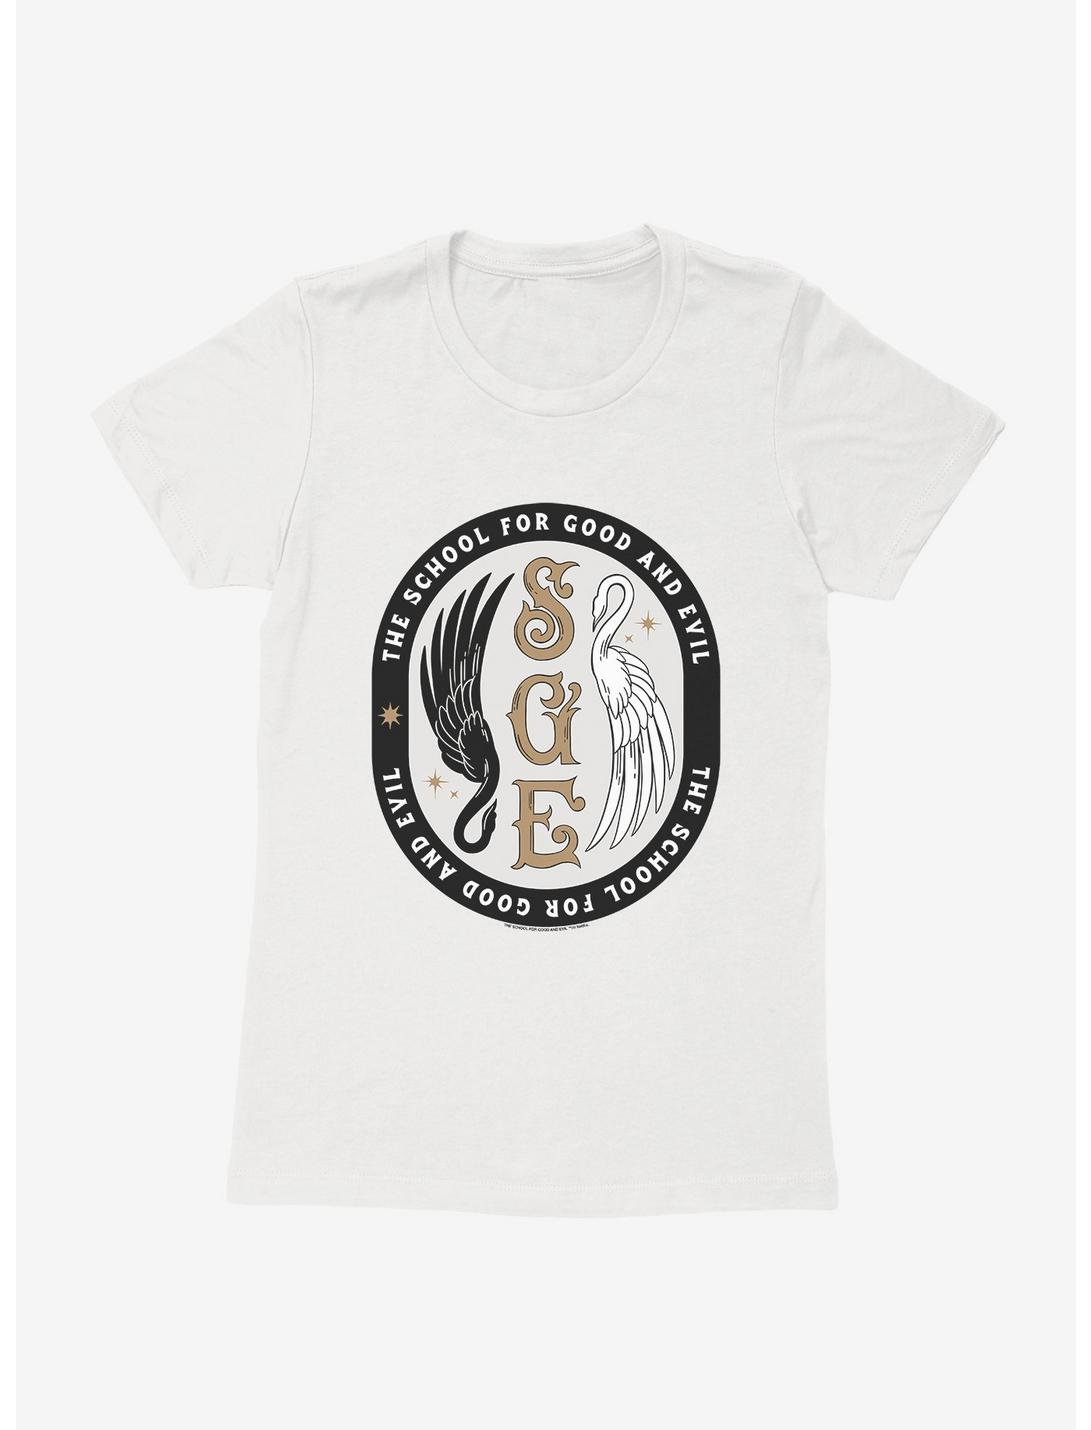 The School For Good And Evil Swan Emblem Womens T-Shirt, WHITE, hi-res